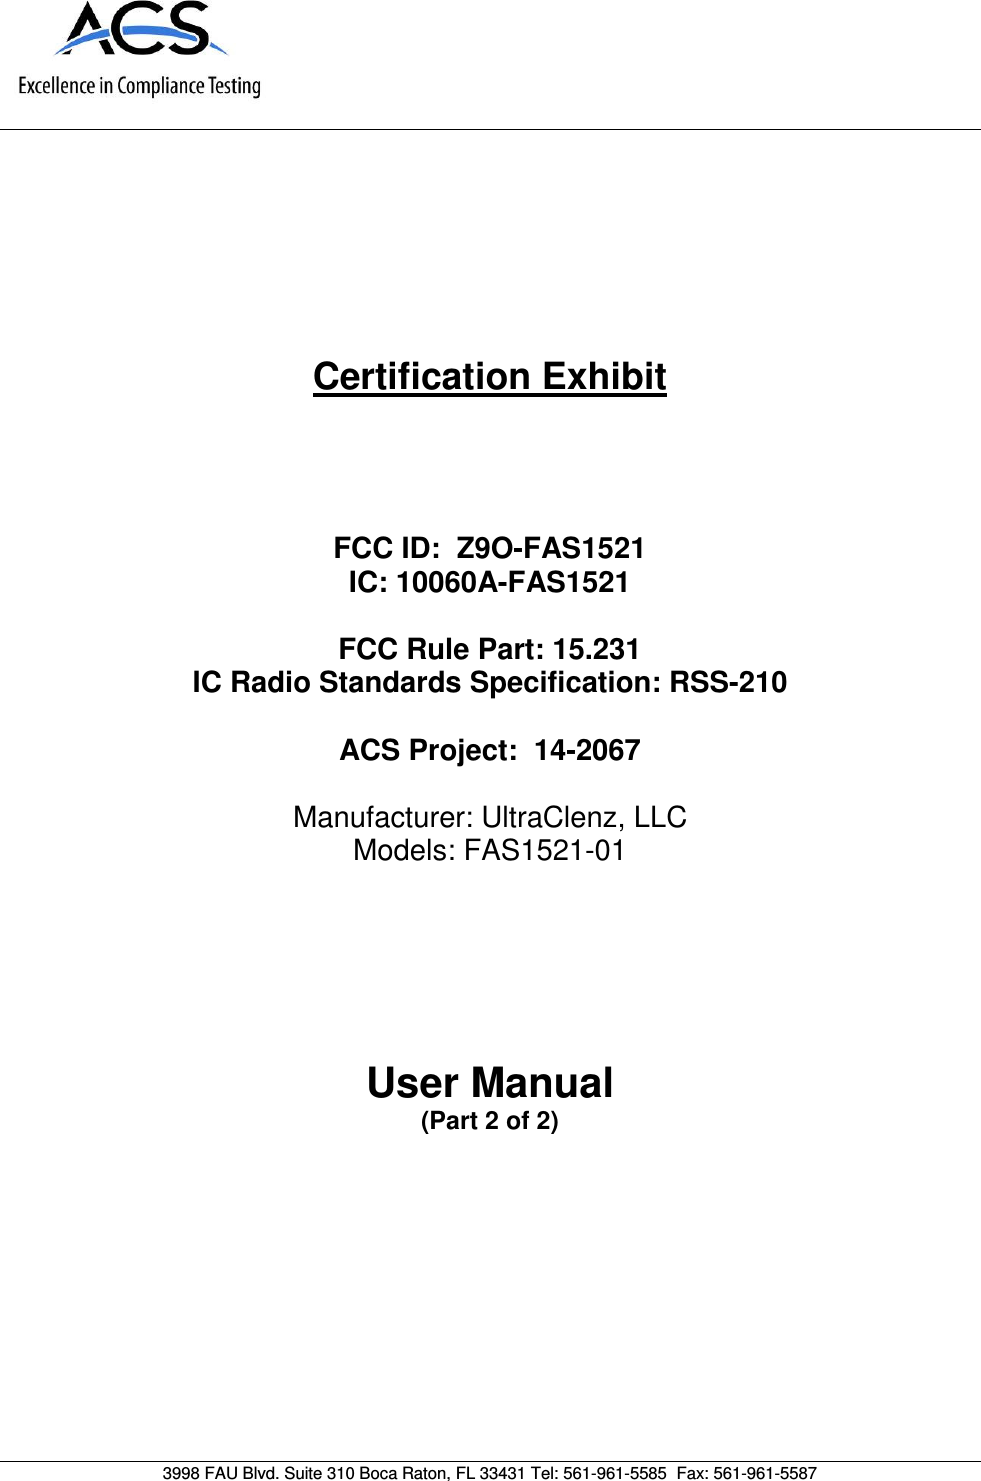      Certification Exhibit     FCC ID:  Z9O-FAS1521 IC: 10060A-FAS1521  FCC Rule Part: 15.231 IC Radio Standards Specification: RSS-210  ACS Project:  14-2067   Manufacturer: UltraClenz, LLC Models: FAS1521-01     User Manual (Part 2 of 2)   3998 FAU Blvd. Suite 310 Boca Raton, FL 33431 Tel: 561-961-5585  Fax: 561-961-5587 